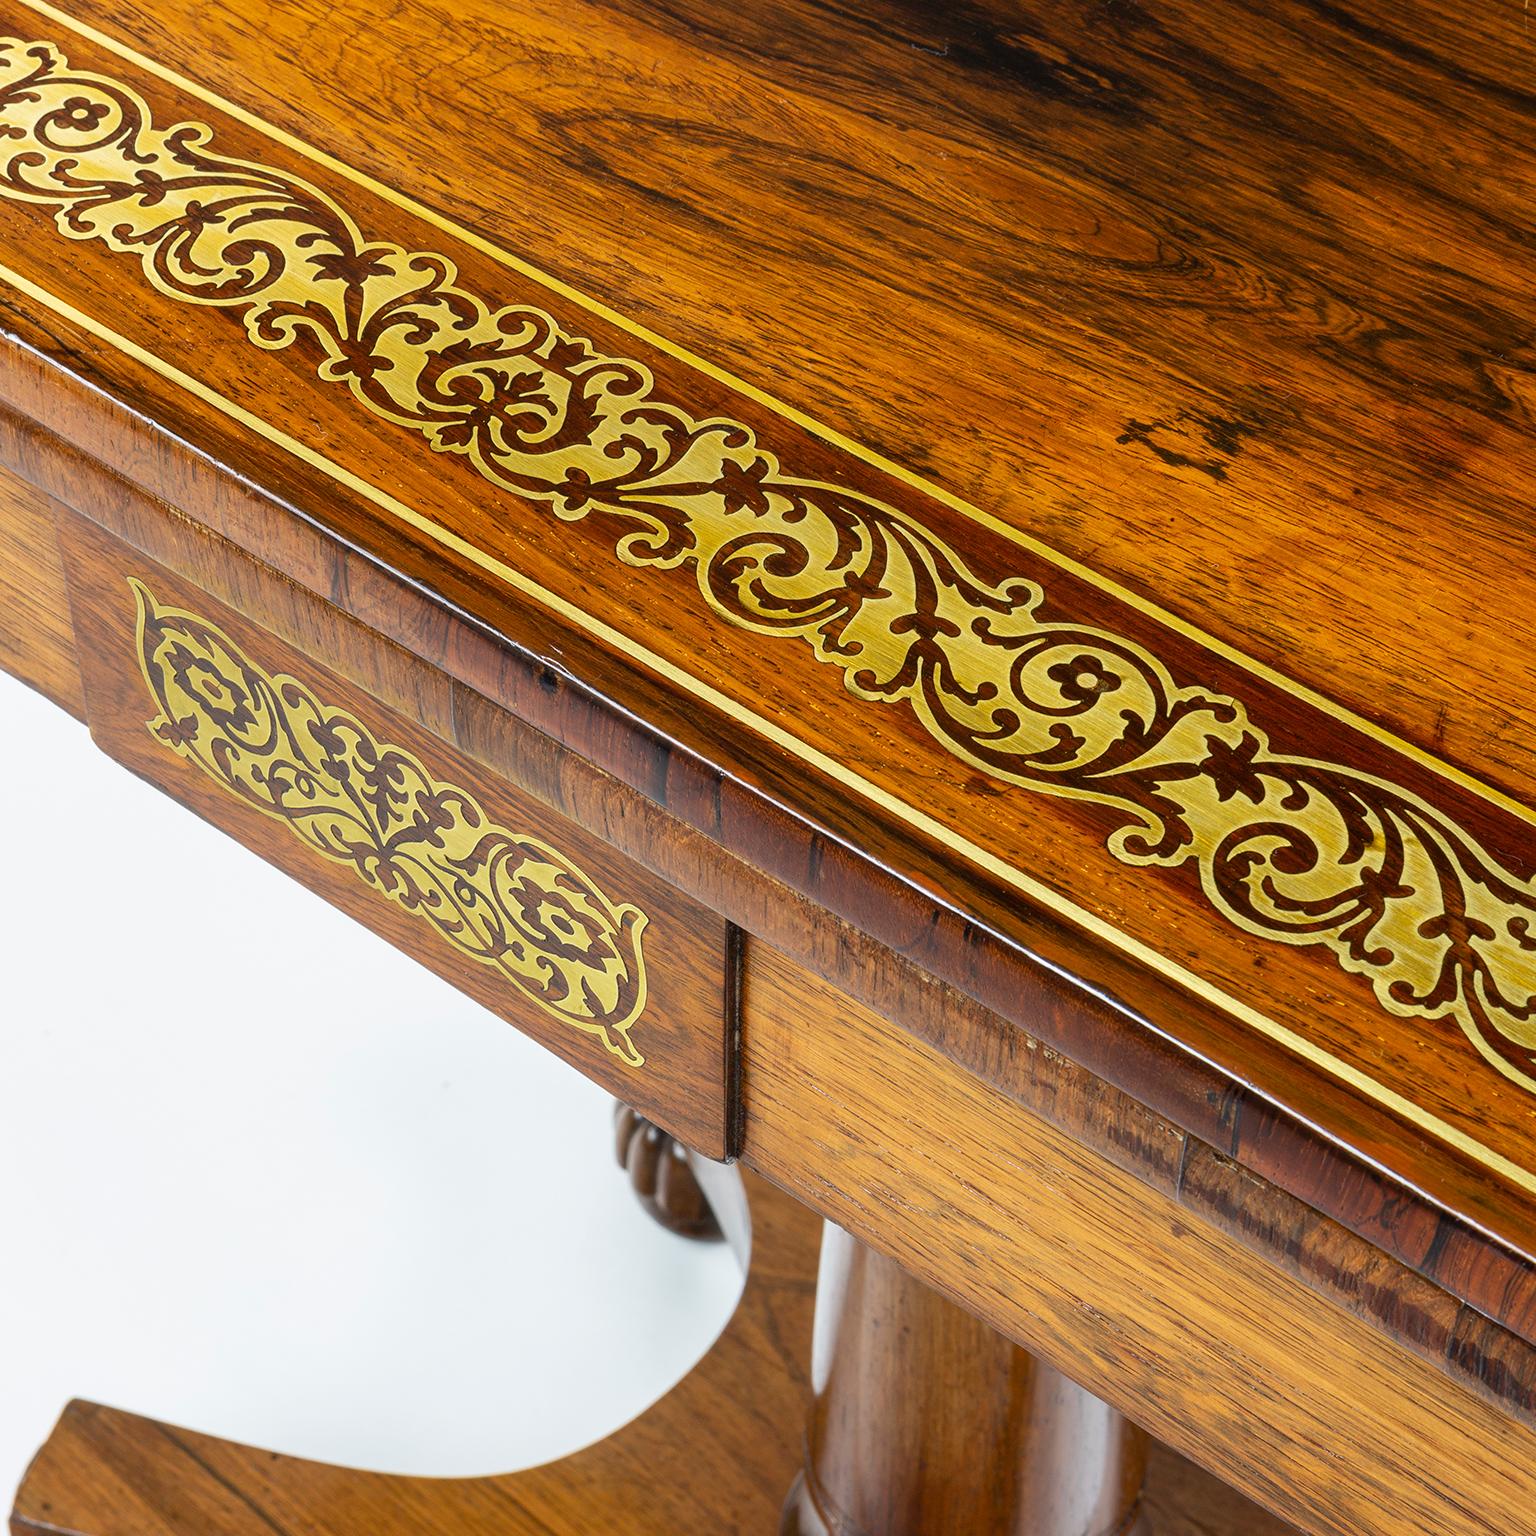 Regency rosewood card table, heavily decorated with brass, attributed to Gillows of Lancaster.

Gillows of Lancaster and London, also known as Gillow & Co., was an English furniture making firm based in Lancaster, Lancashire, and in London. It was